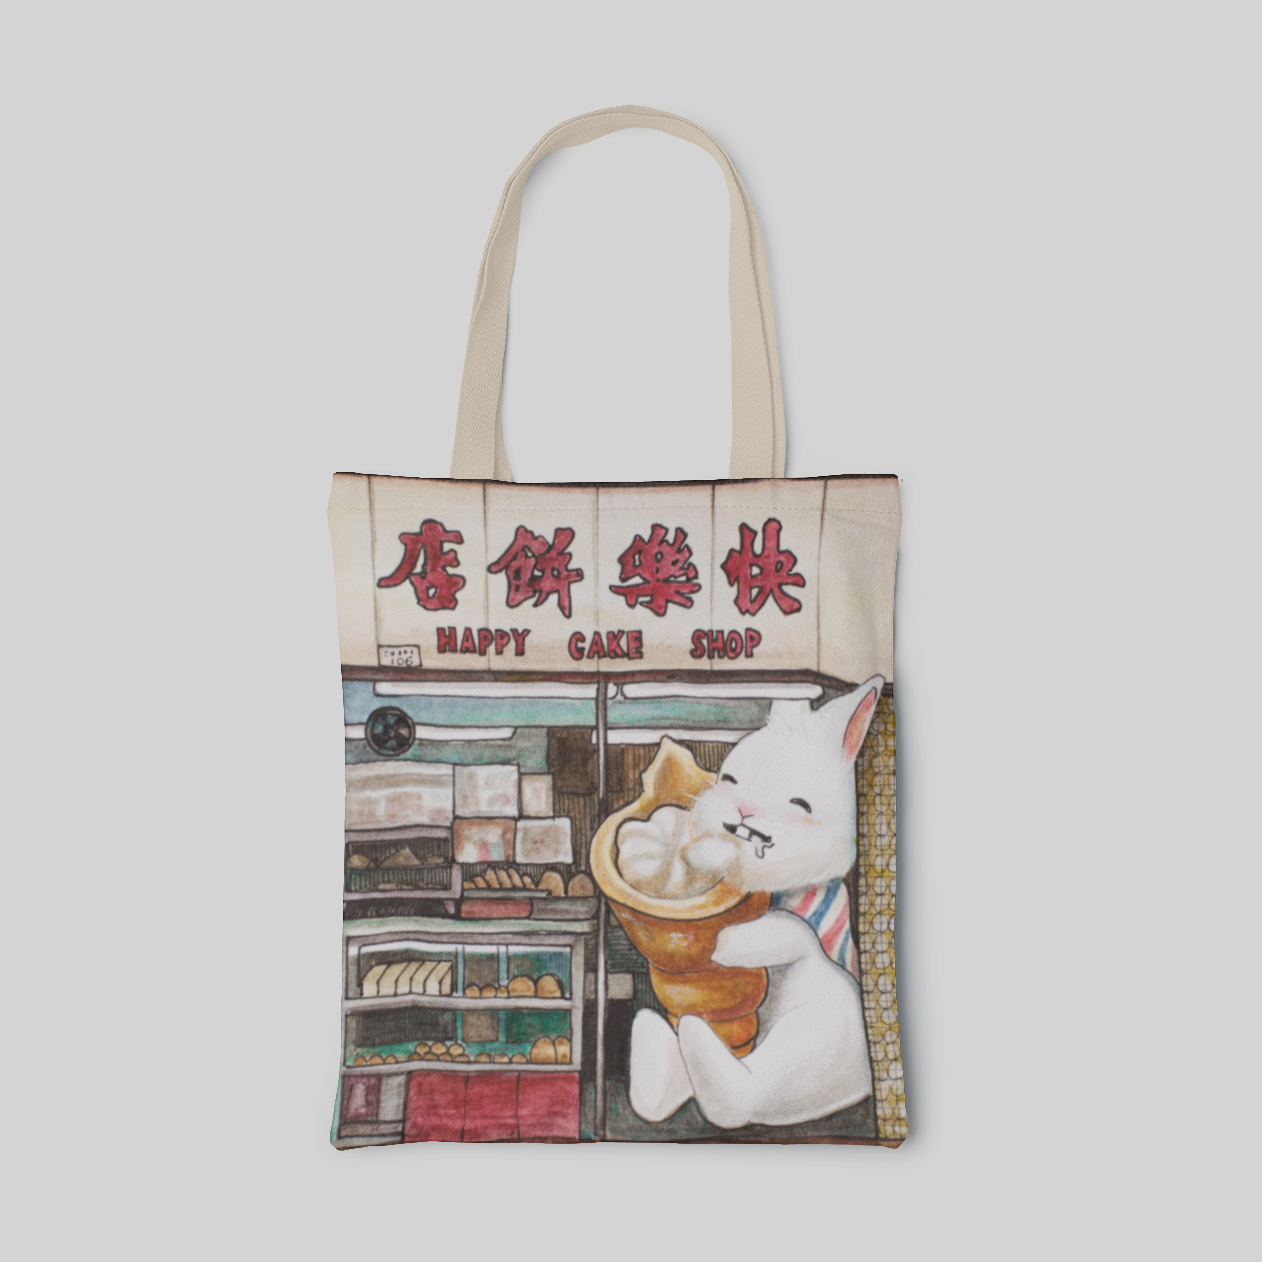 lowbrow designed tote bag with a white rabbit eating creme cornet in a bakery, front side